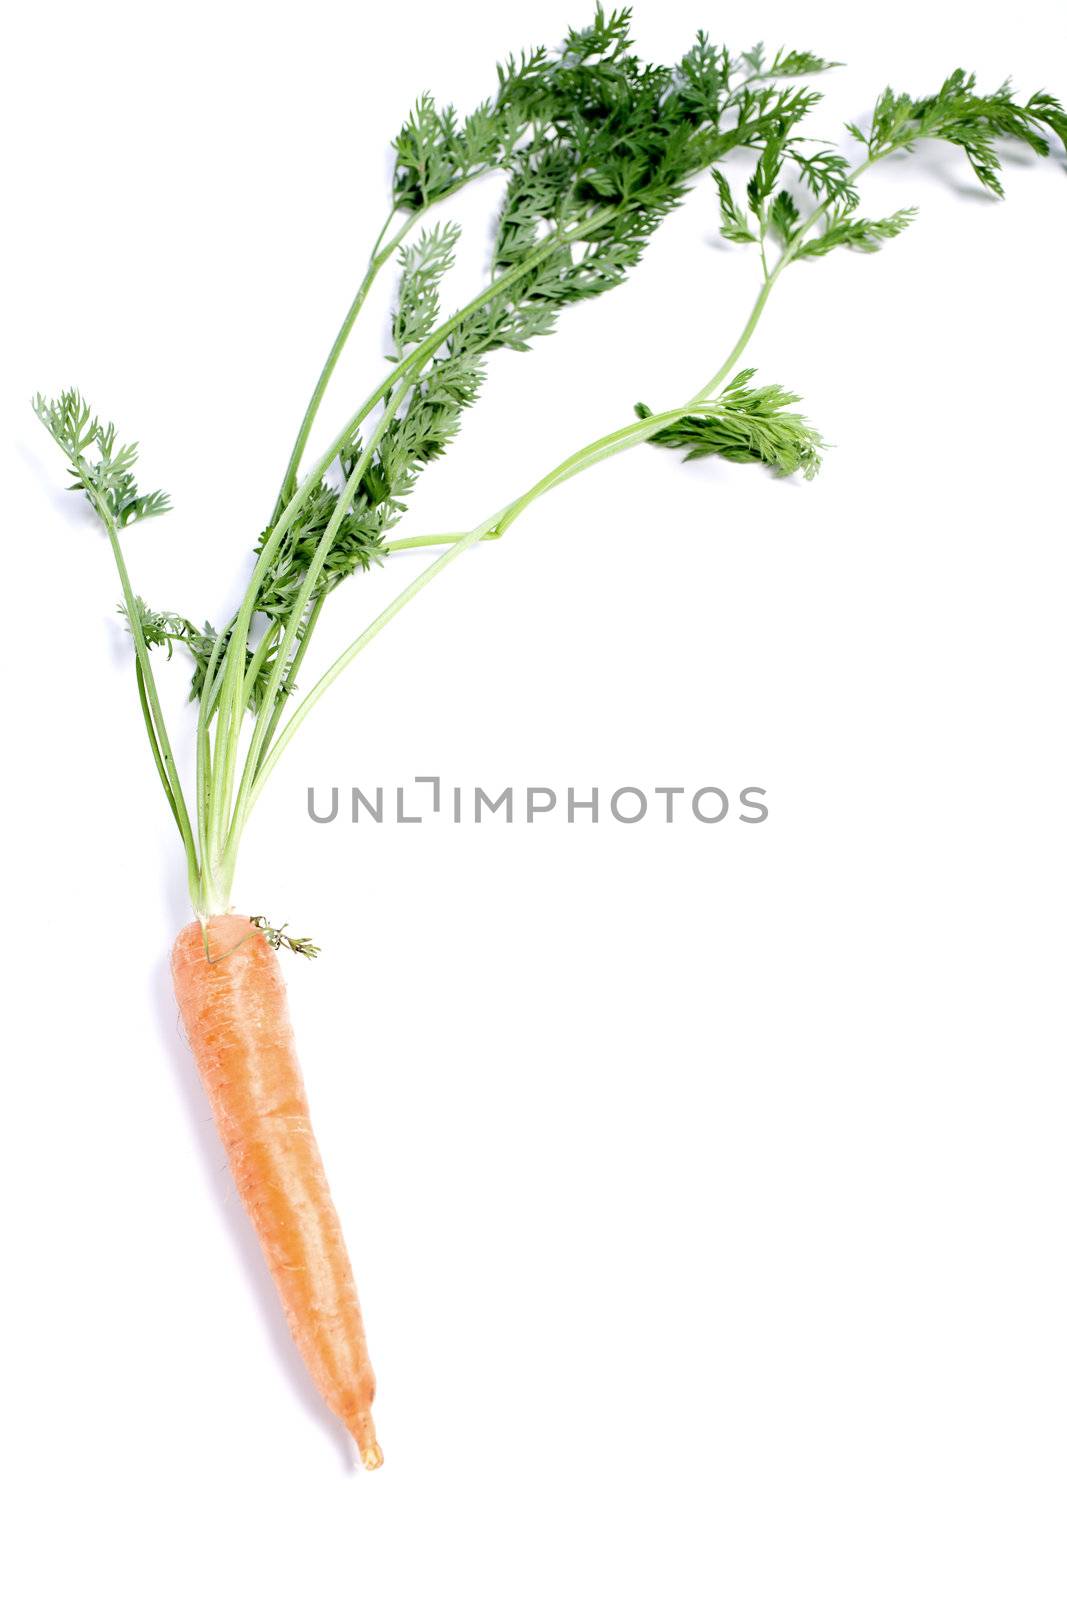 Fresh carrot on an isolated background